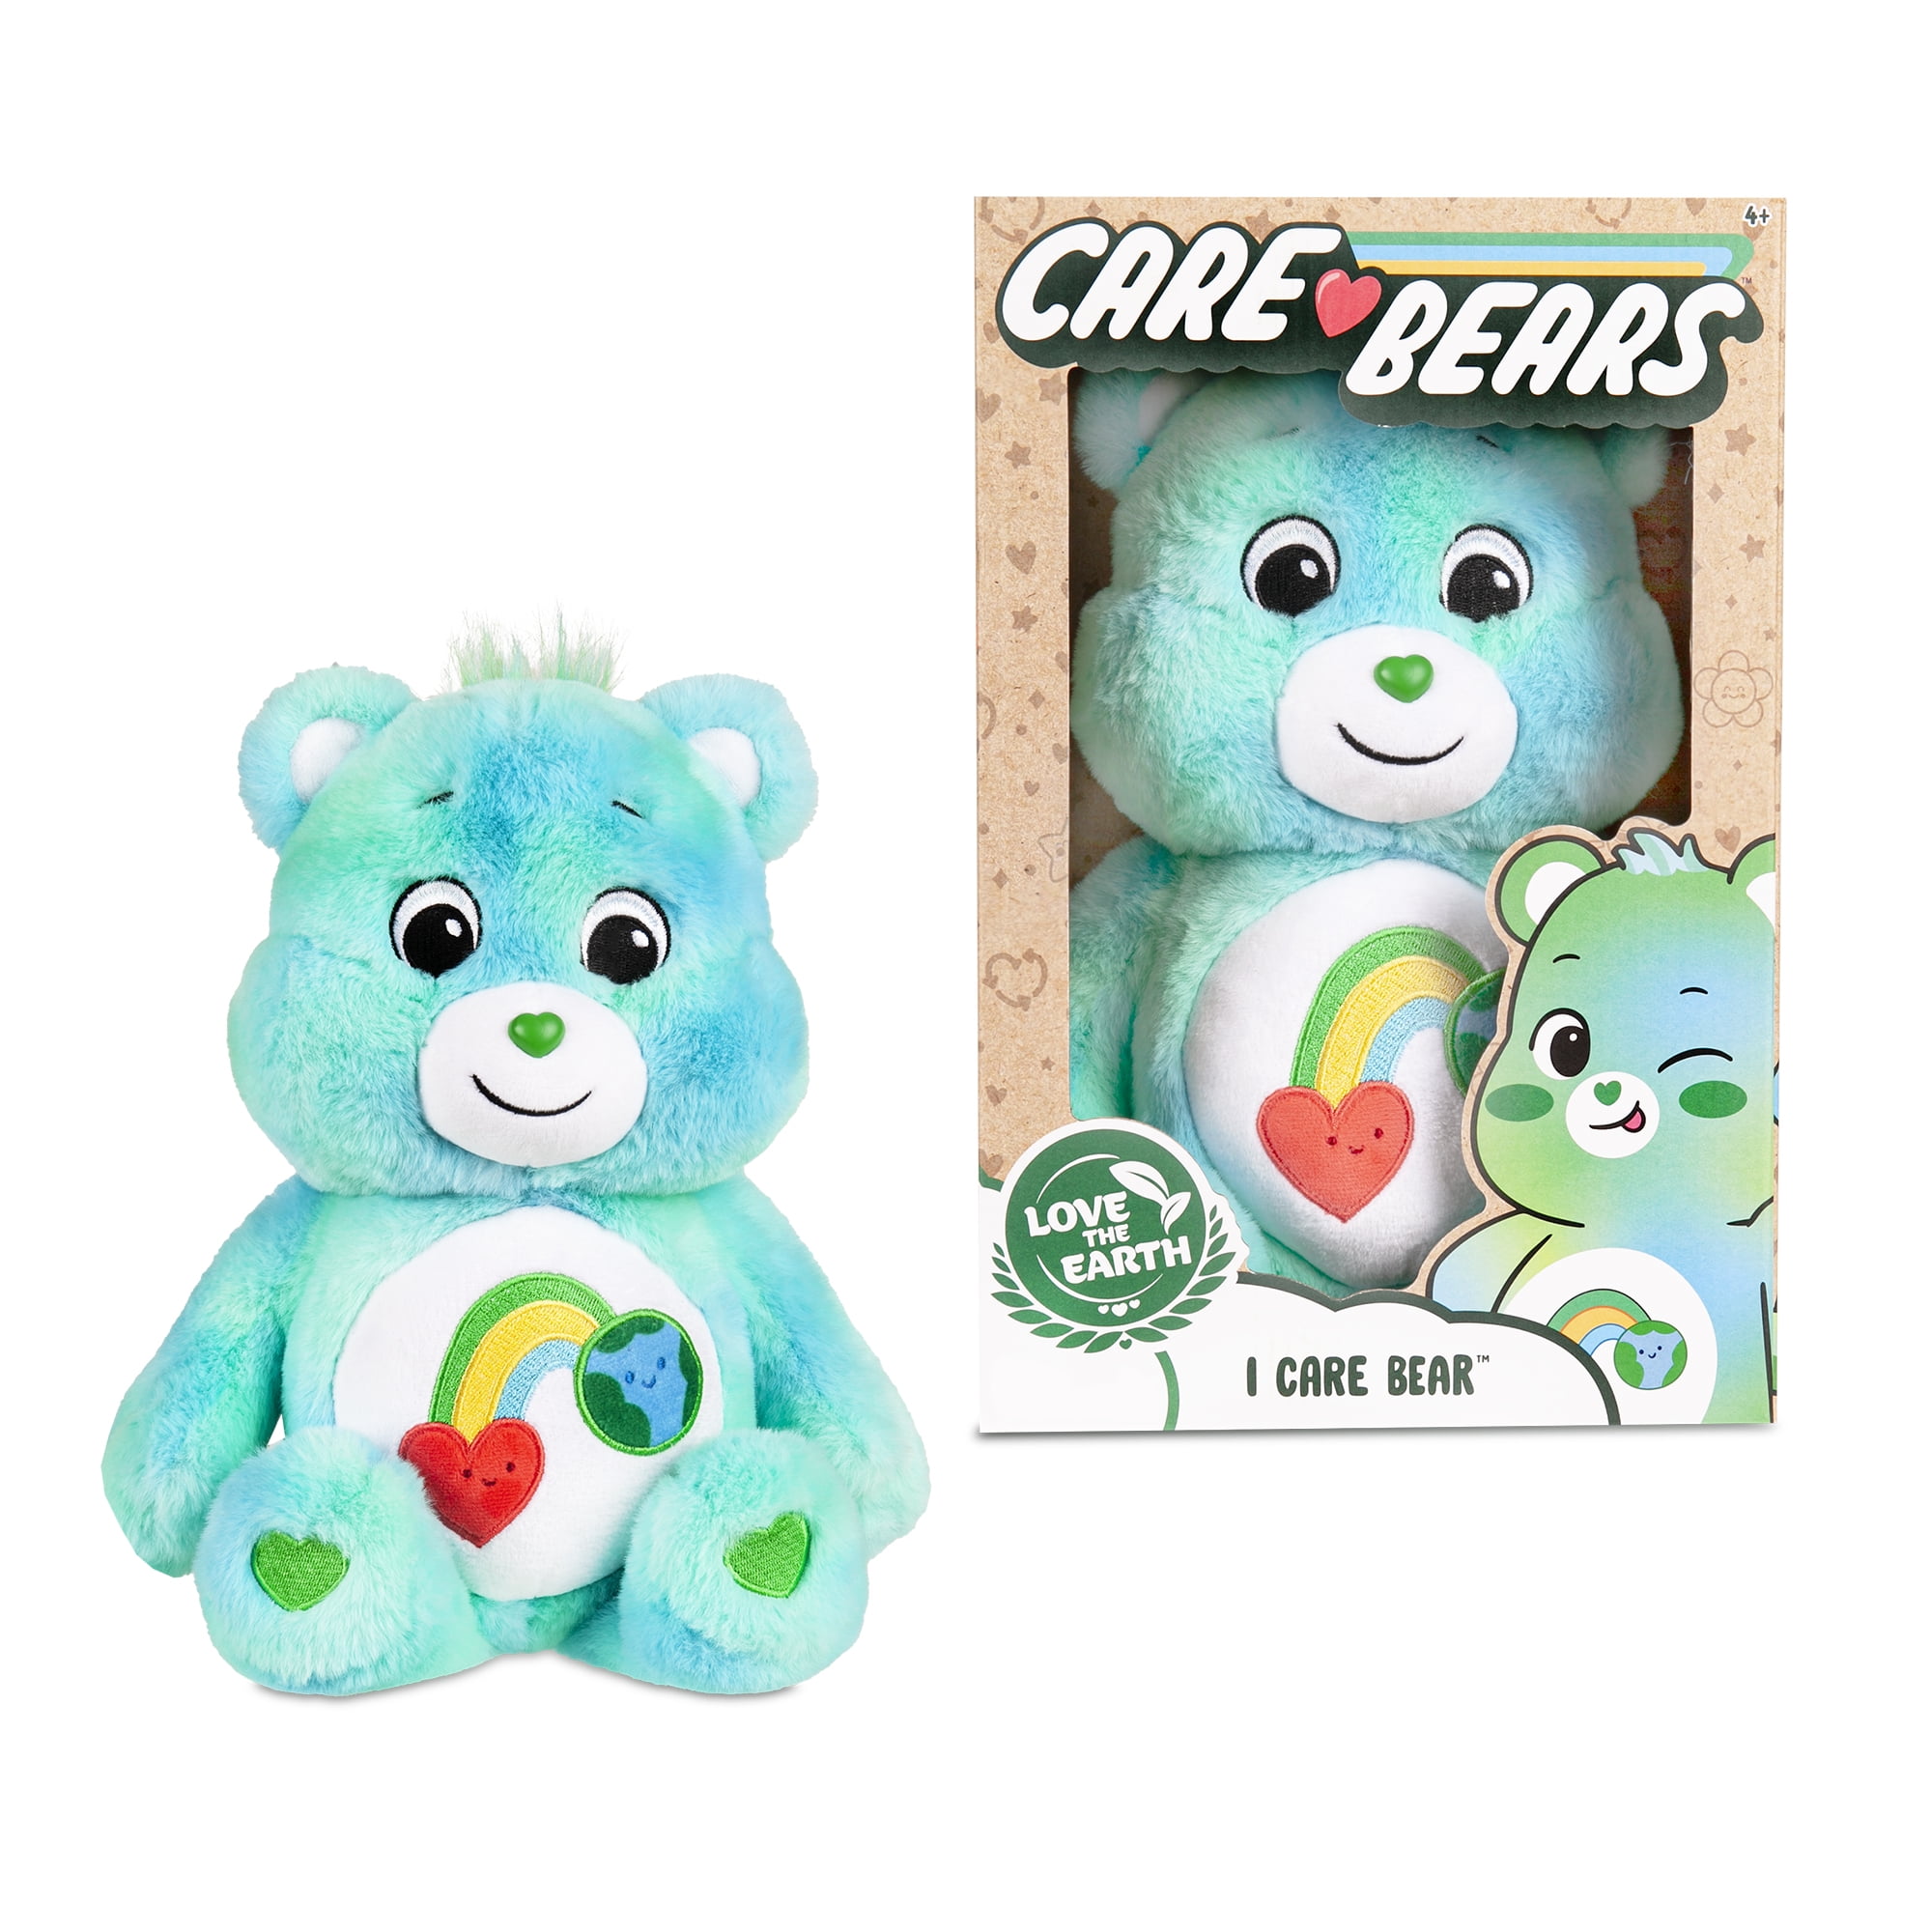 New 2020 Care Bears 14" Grumpy Bear with Coin Collectible Walmart Exclusive 